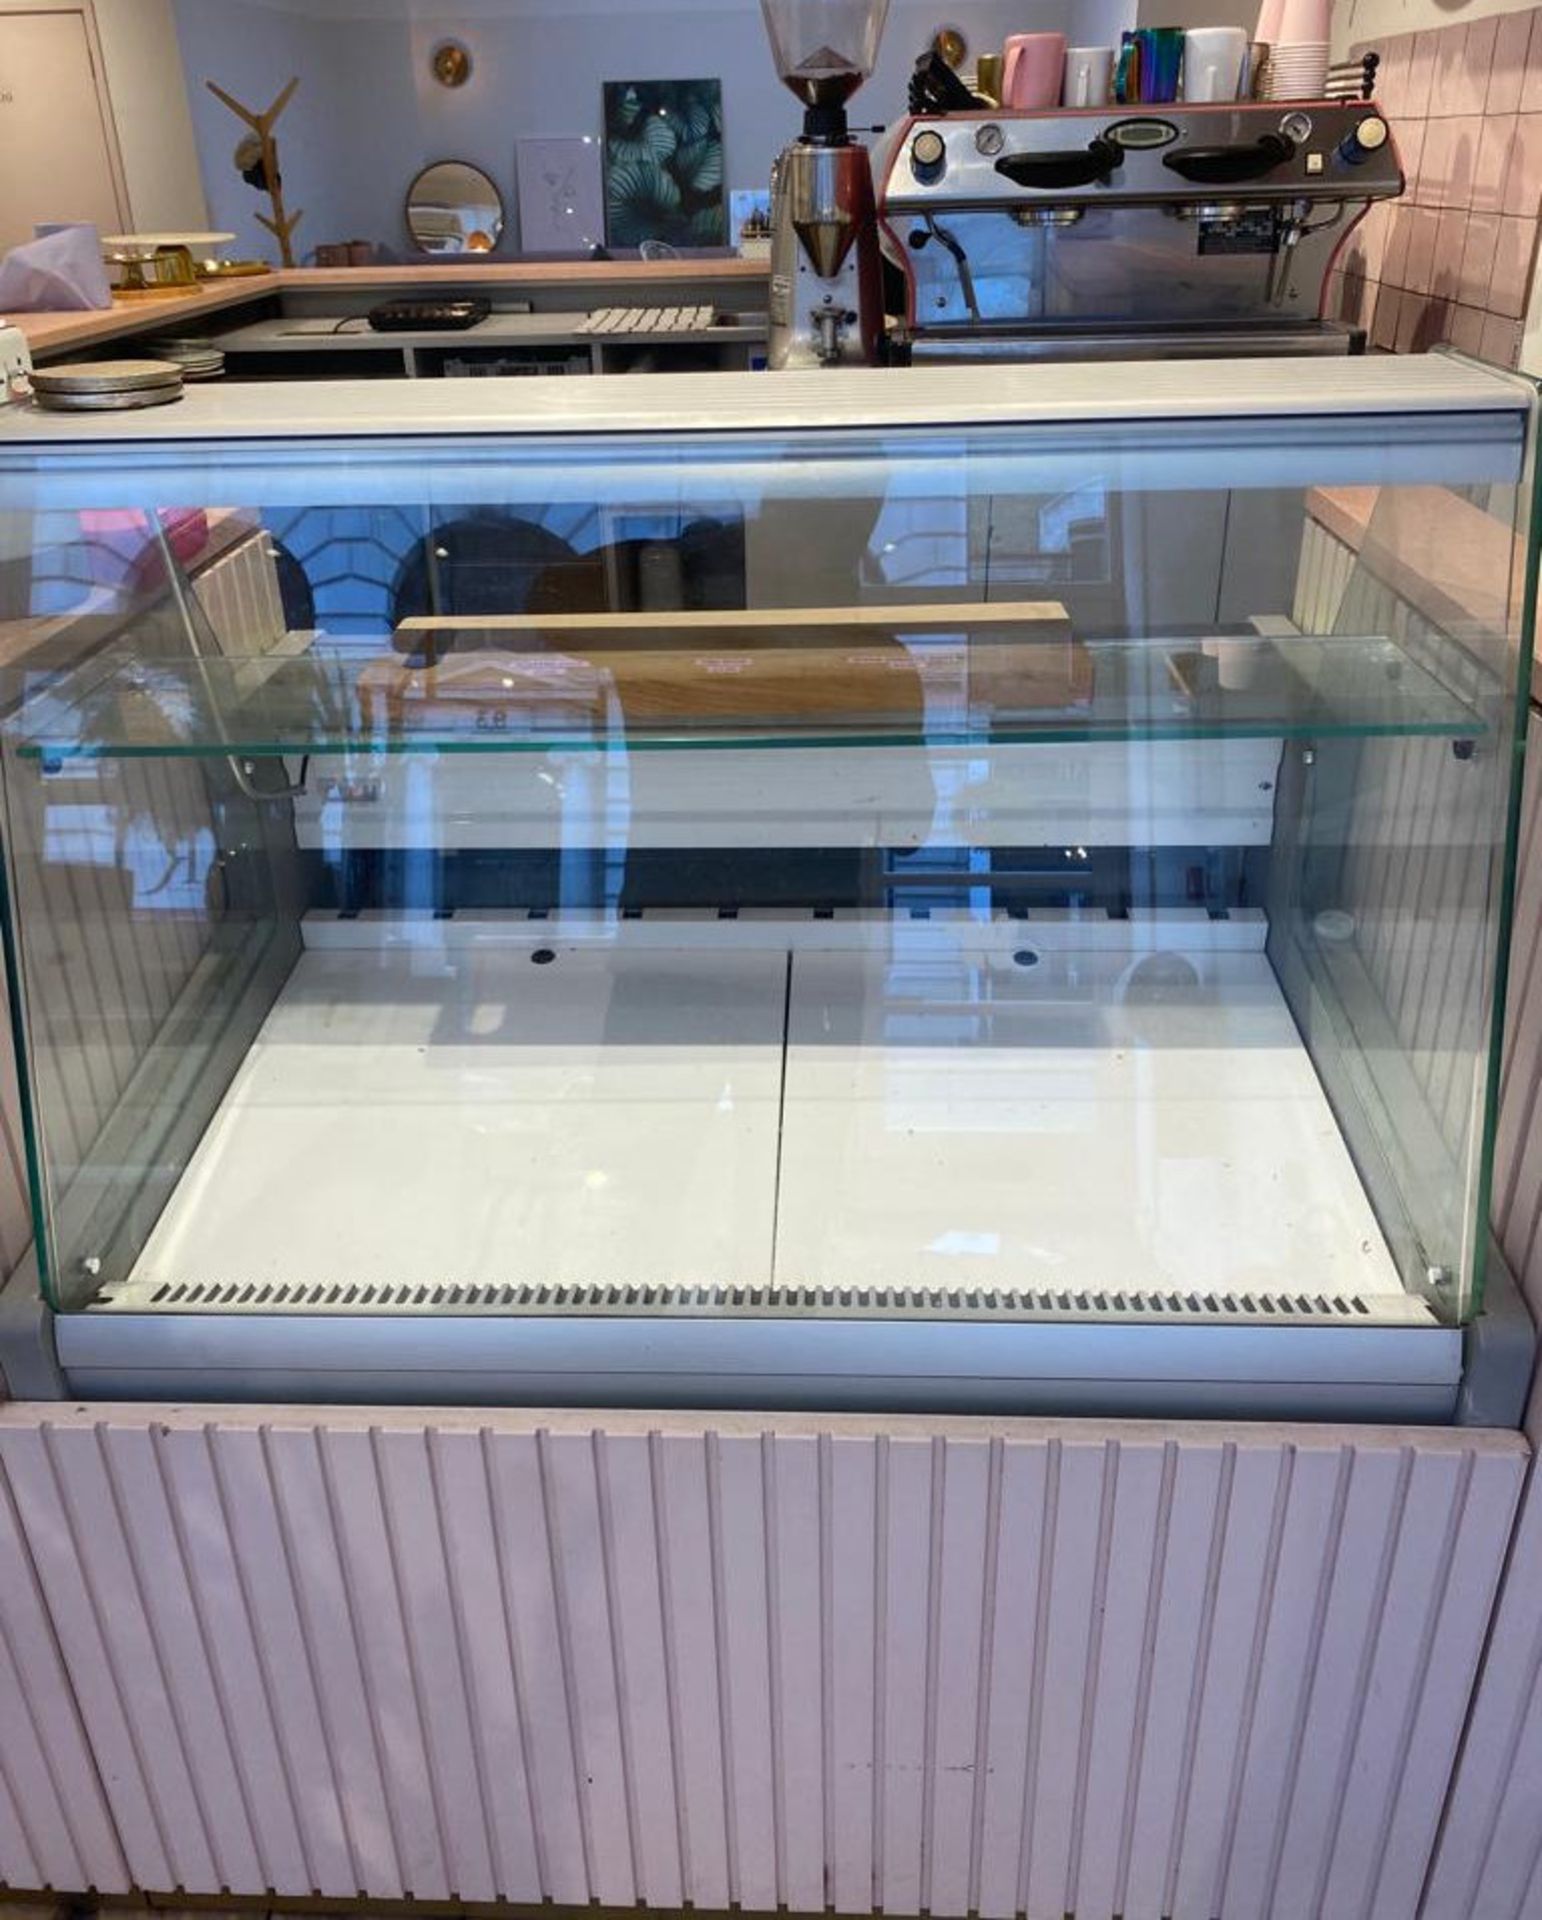 1 x Blizzard Zeta100 Slim Serve Over Refrigerated Counter With Flat Glass Display - Size: 1050mm (w)